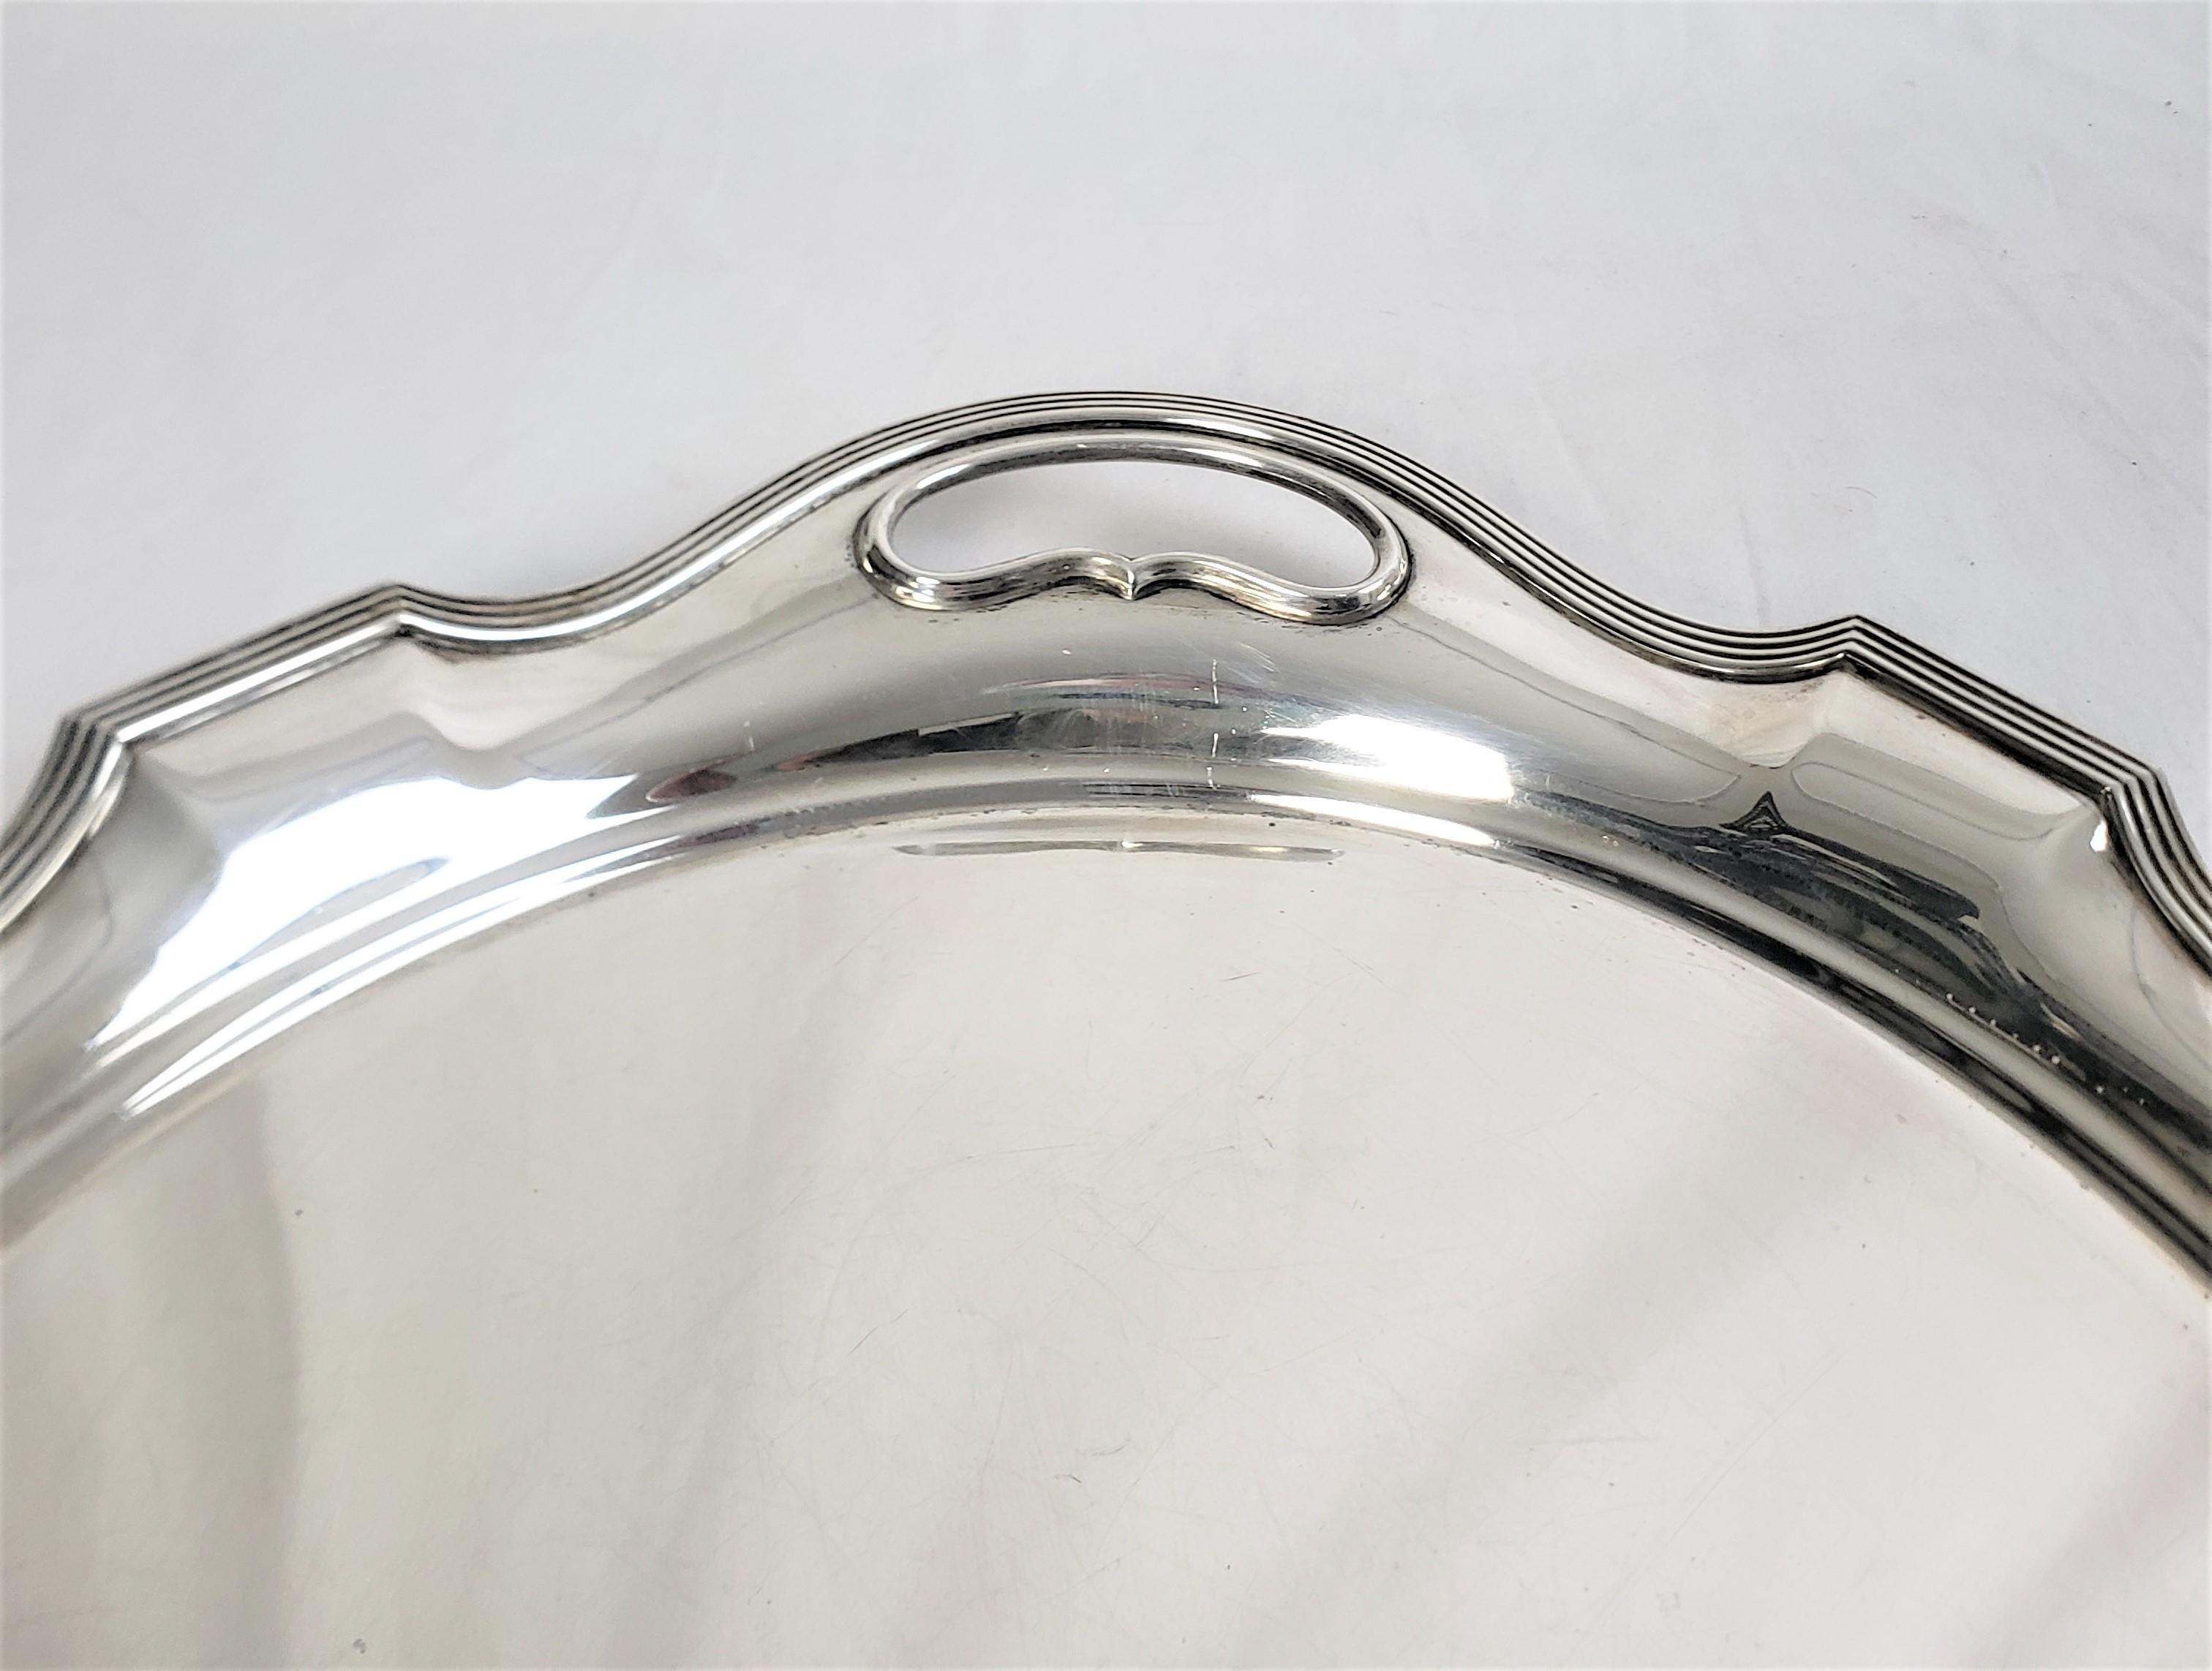 Antique Art Deco Gorham Large Oval Sterling Silver Serving Tray In Good Condition For Sale In Hamilton, Ontario